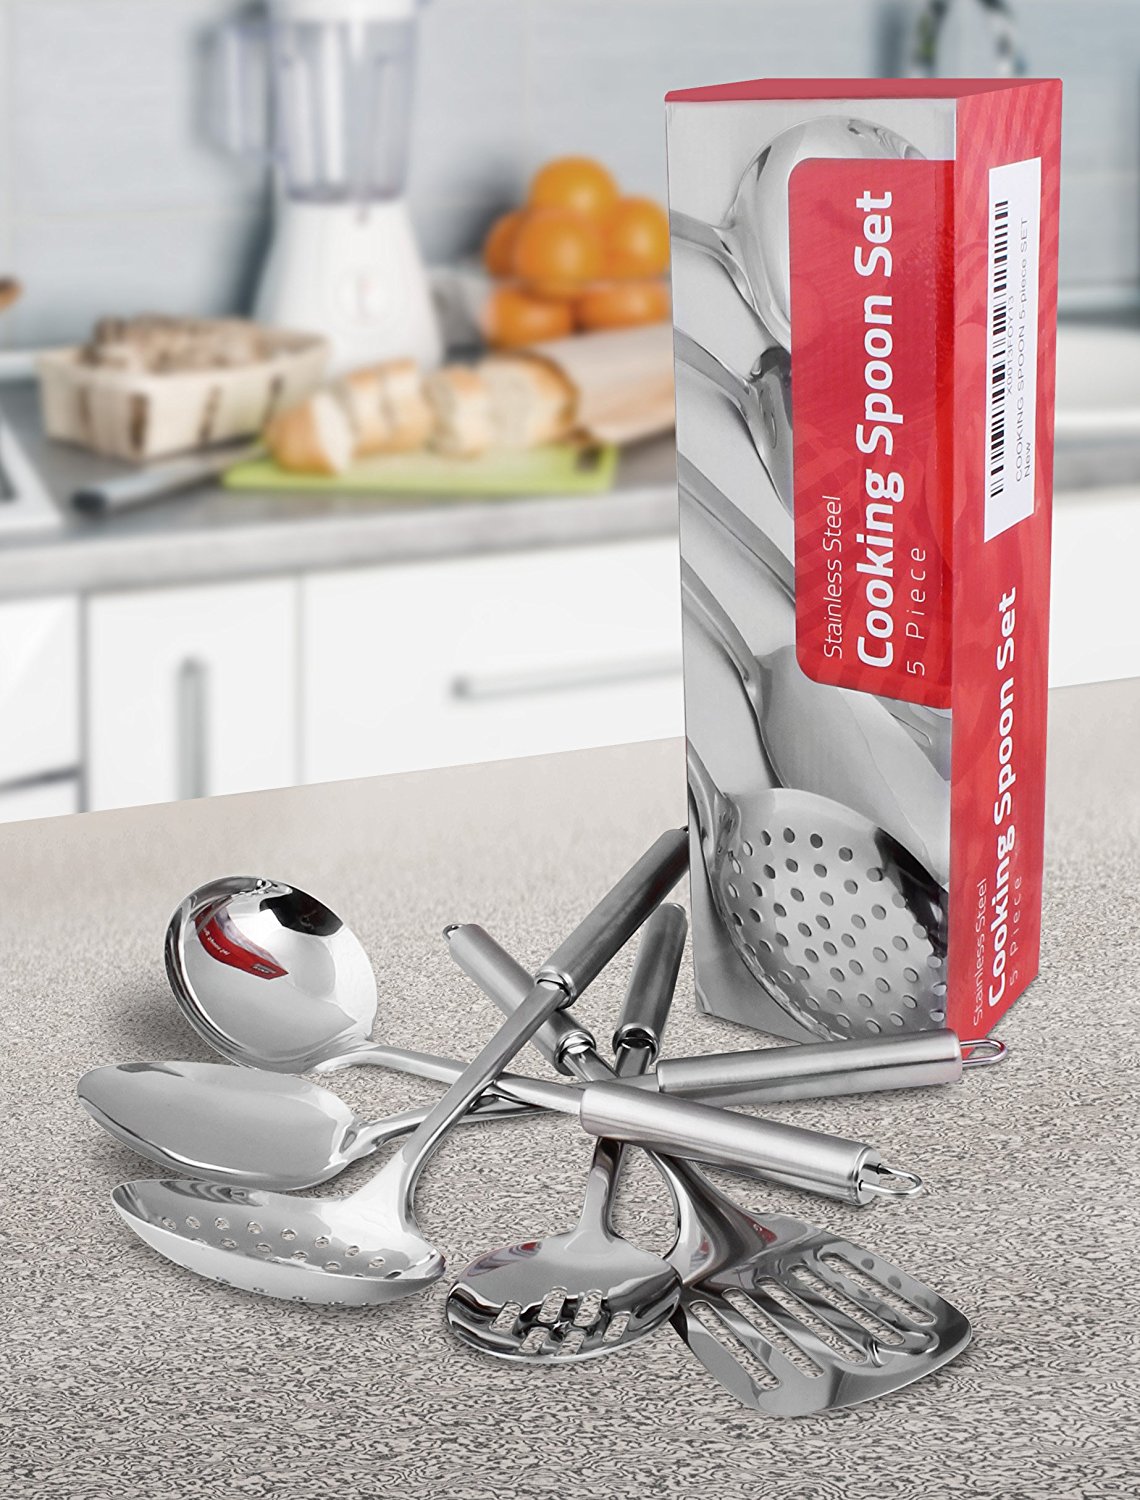 Utopia Kitchen Stainless Steel Cooking Utensil Holder 5 x 5.3 Inches 